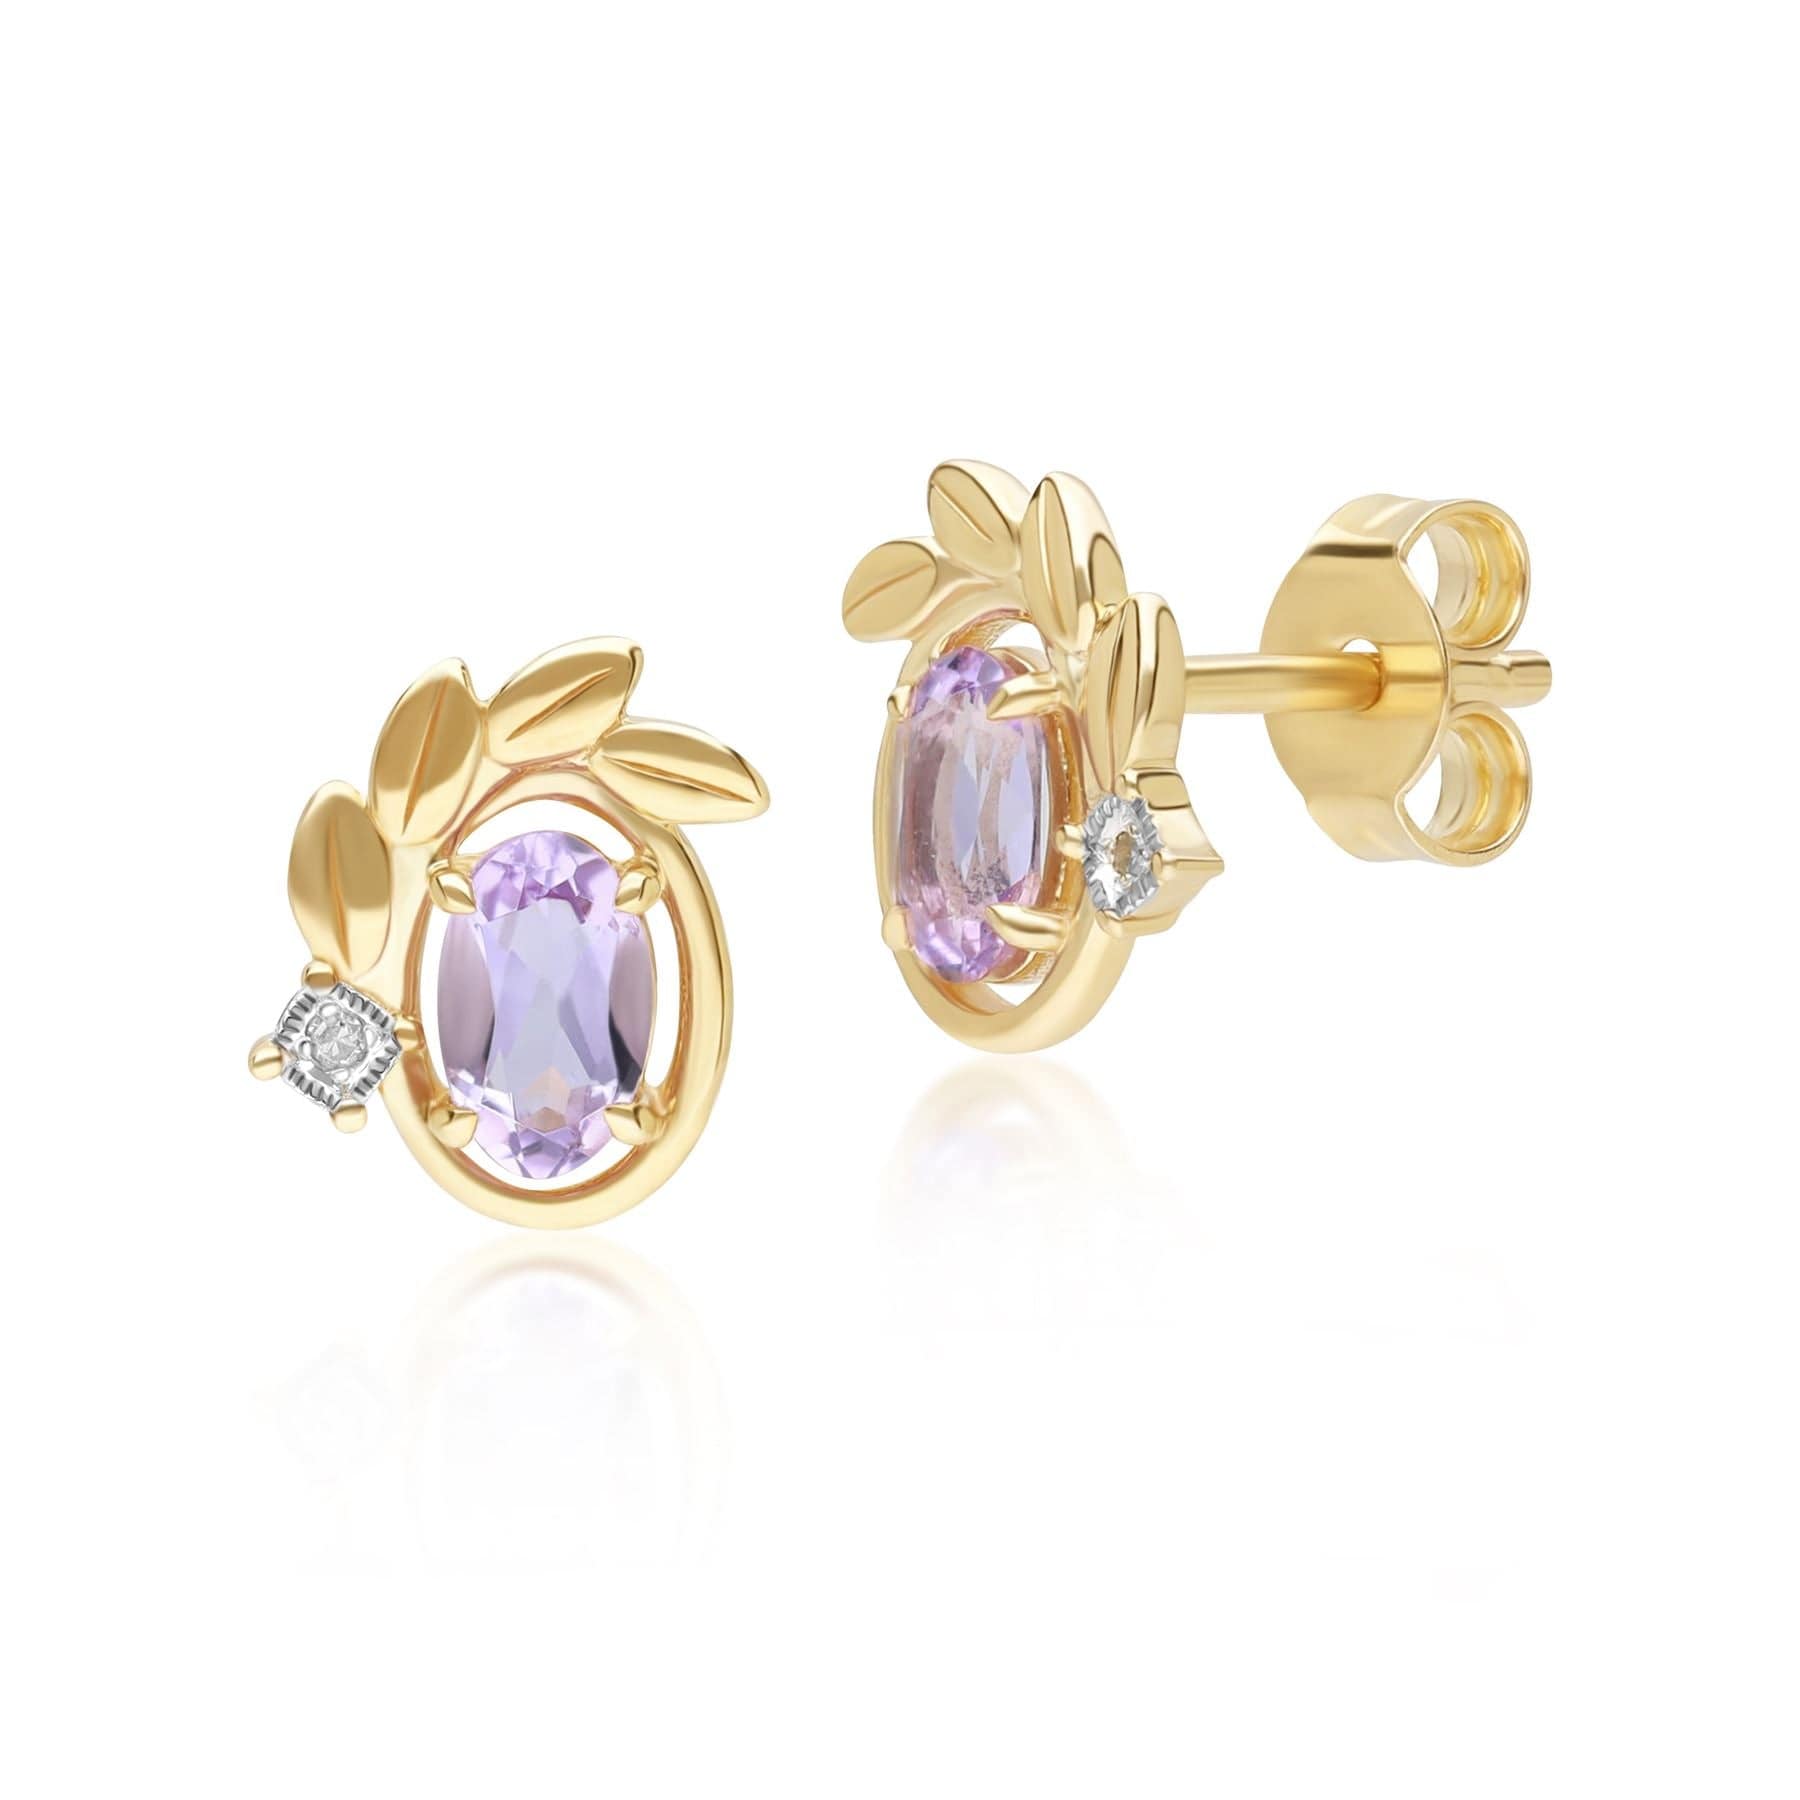 Children's Earrings Cultured Pearl & Amethyst 14K Yellow Gold | Kay Outlet